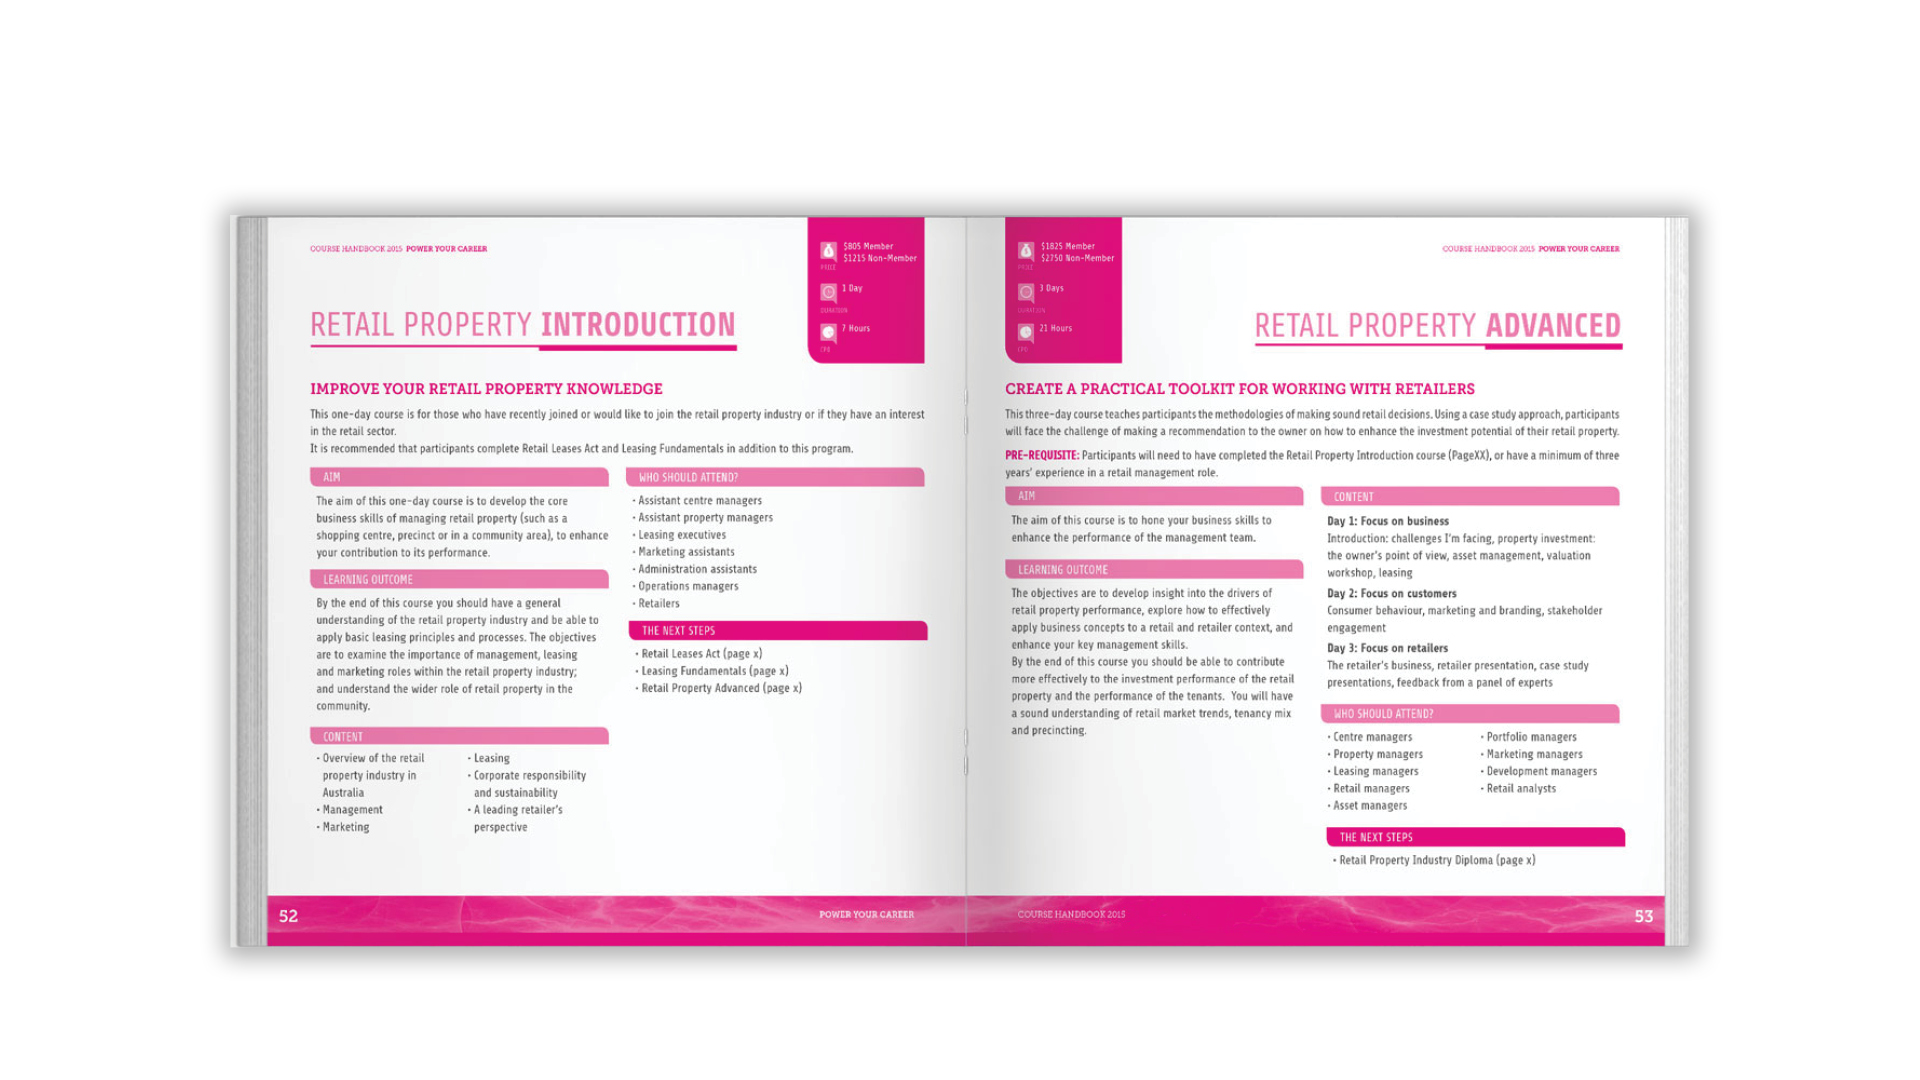 Property Council Academy Courses Collateral 2015 by Think Creative Agency9